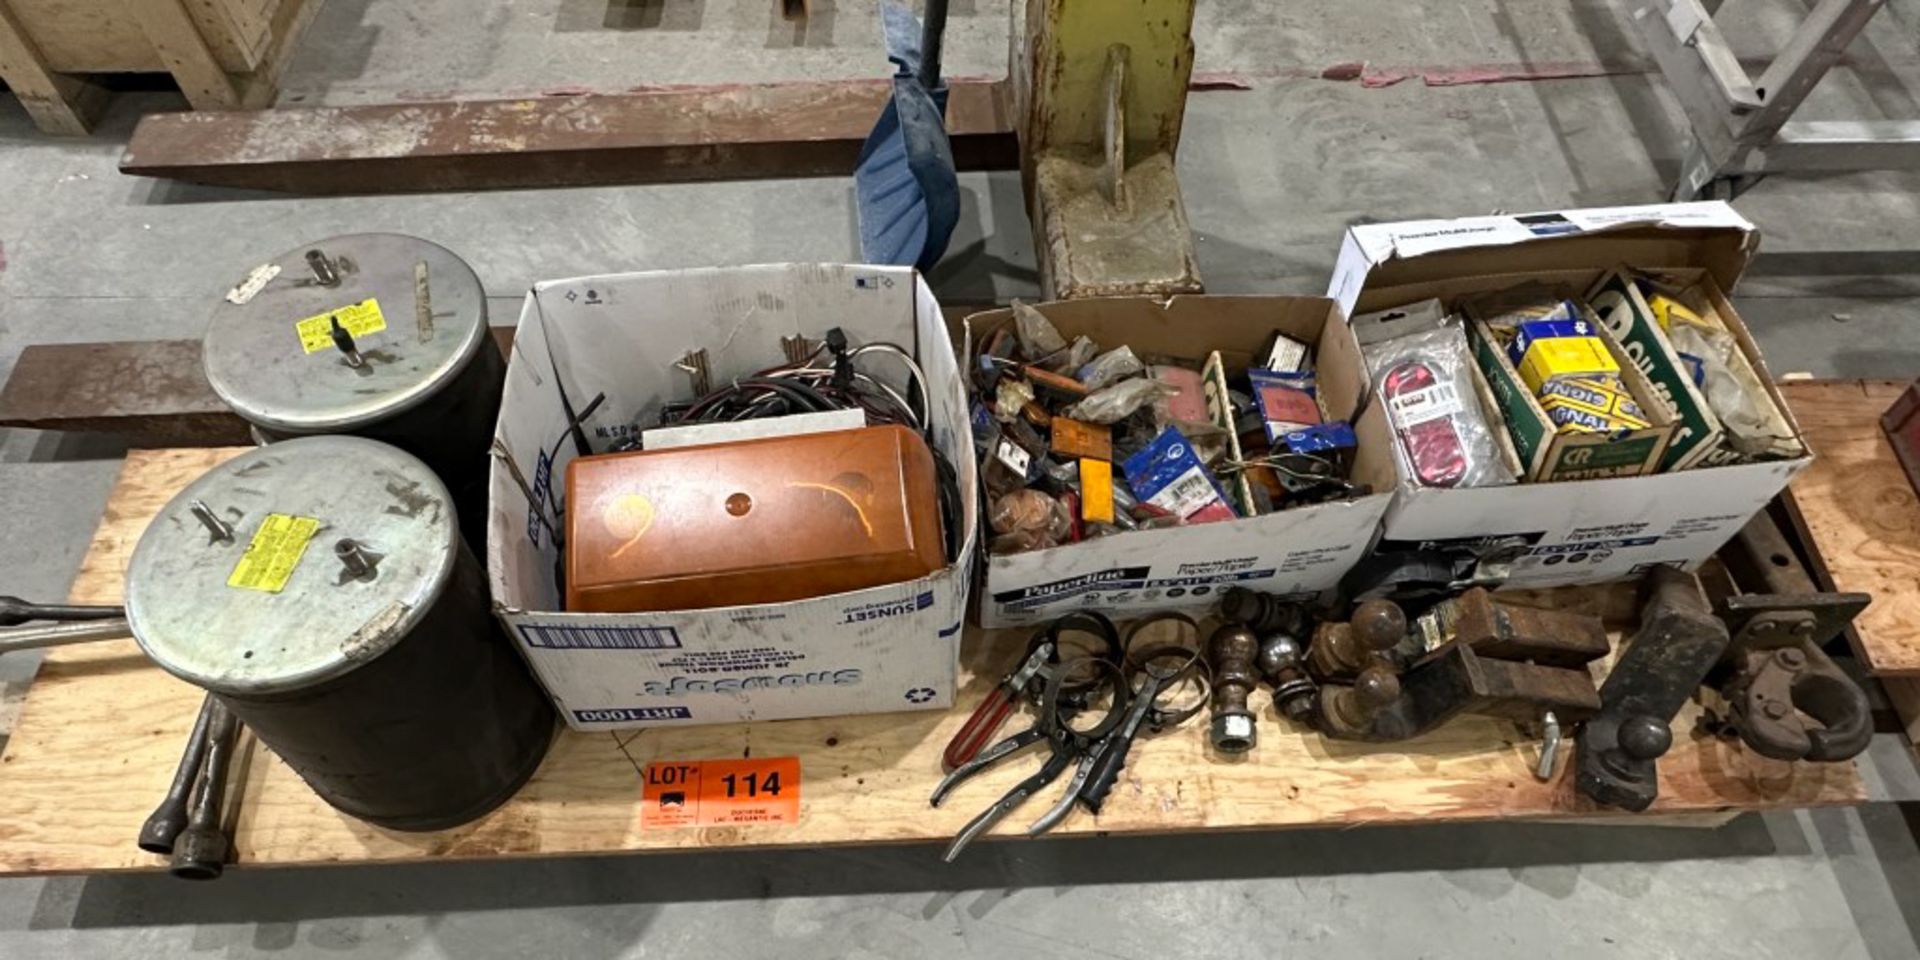 LOT/ skid and contents - hitch balls, hooks and hardware